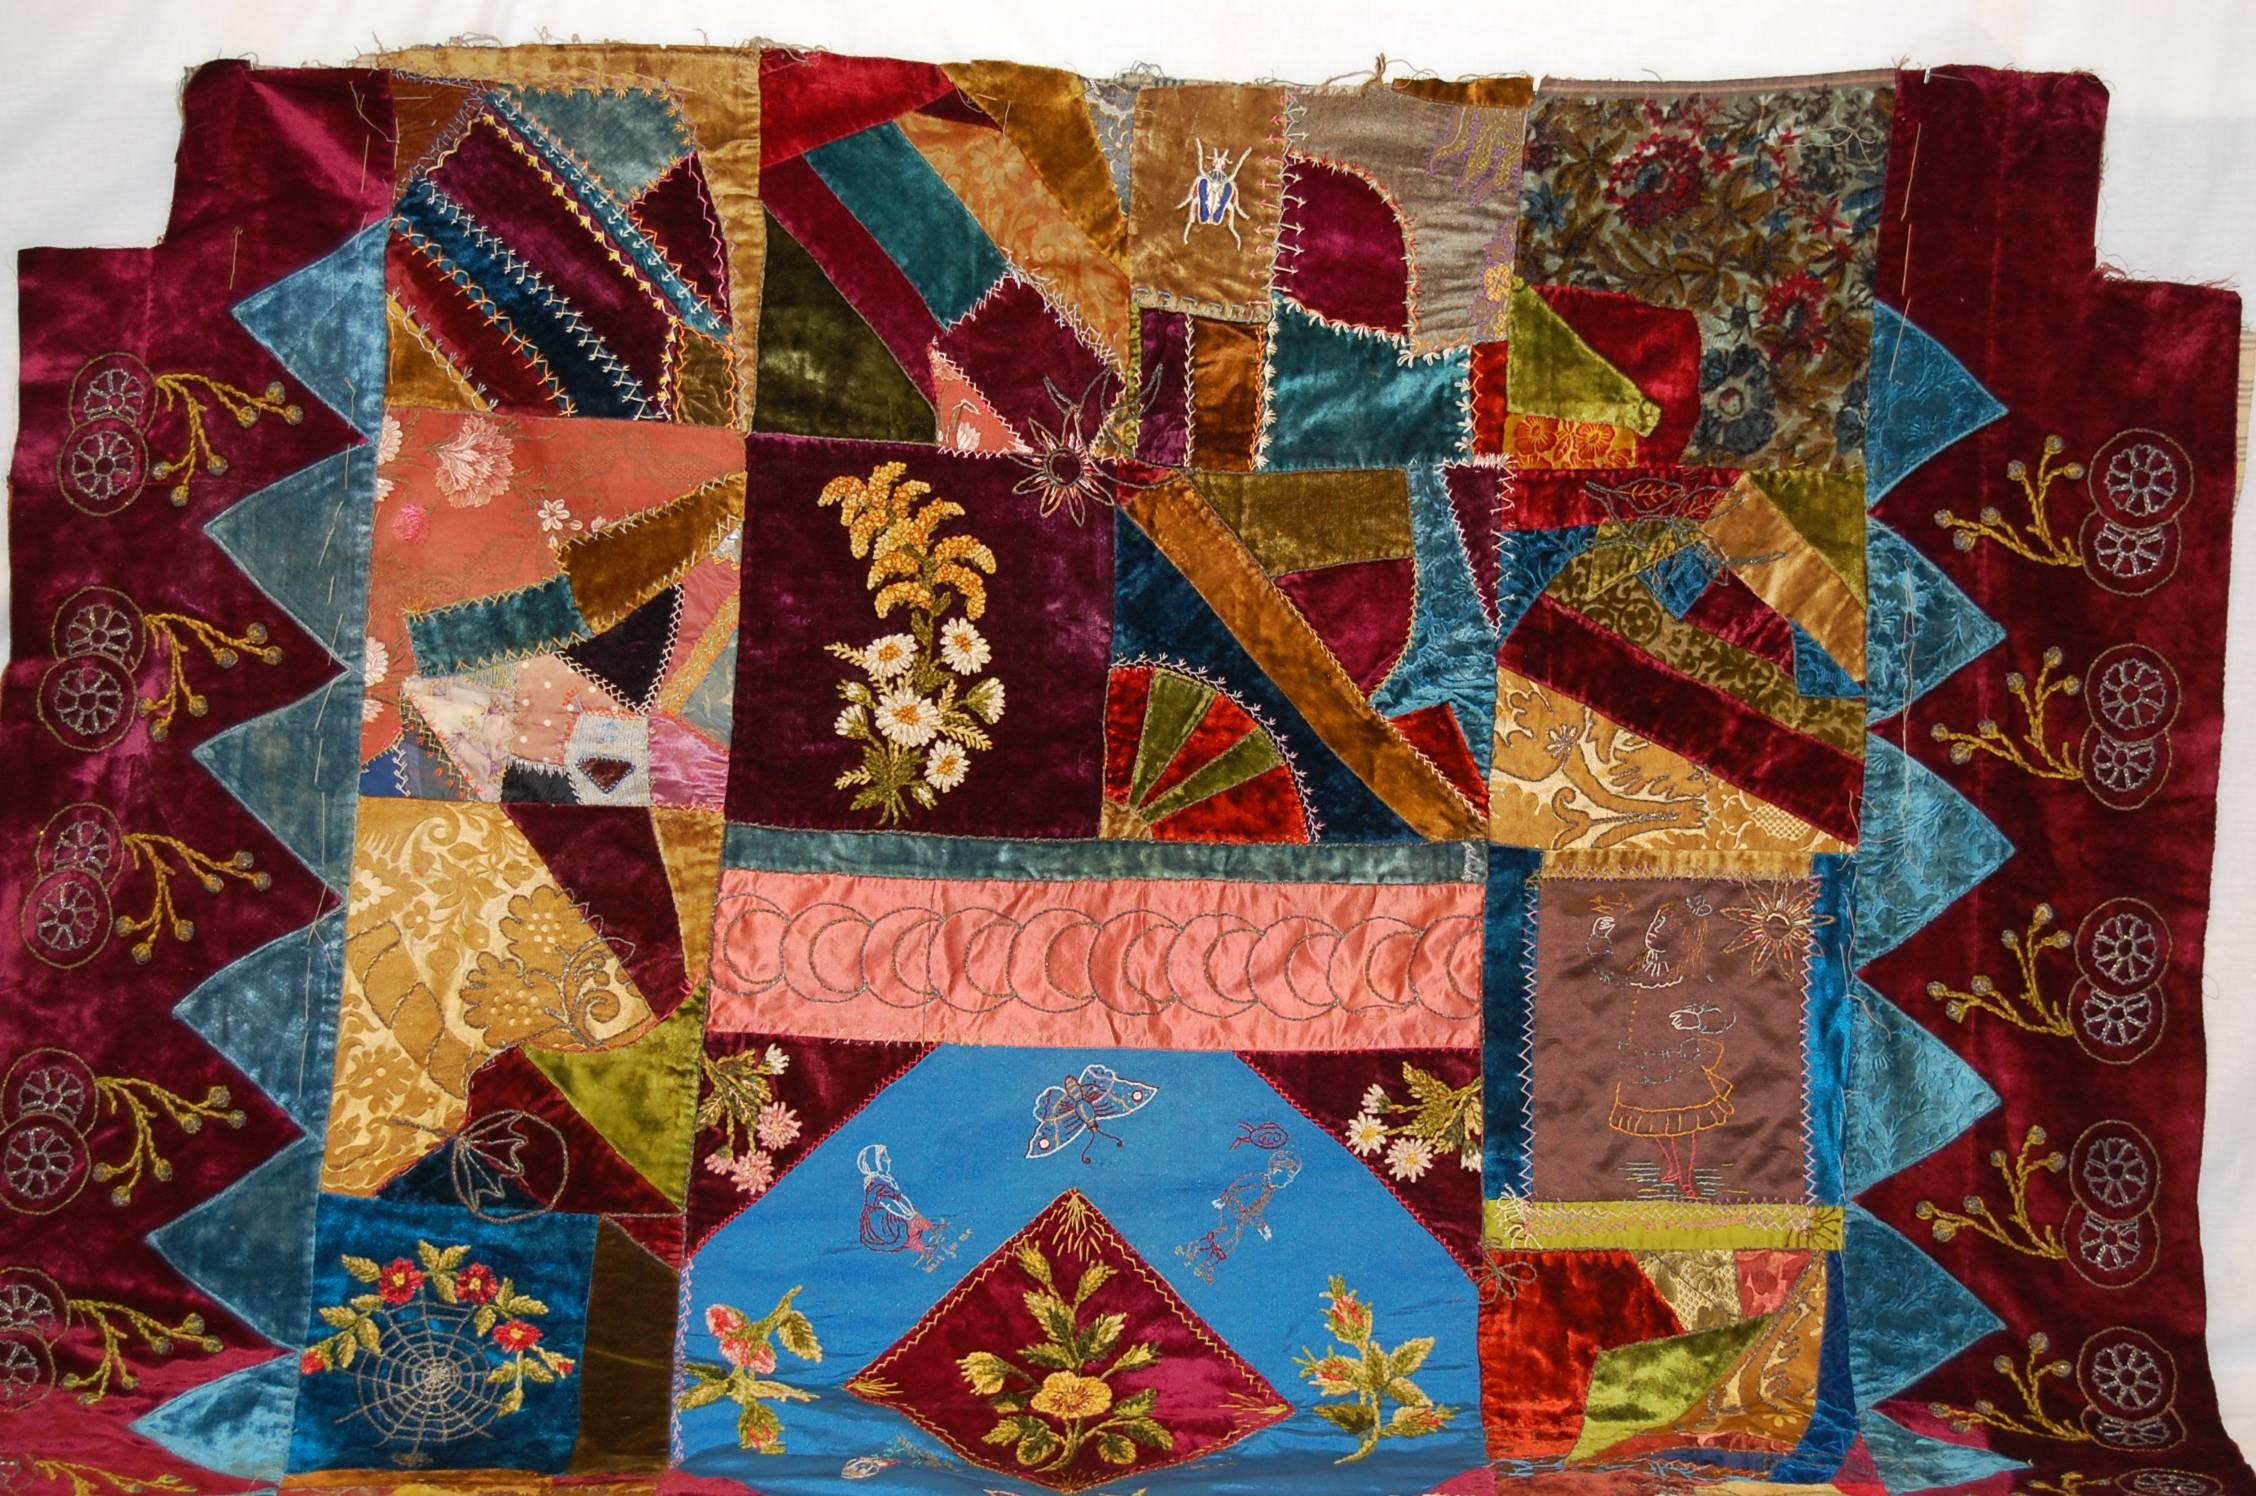 Fantastic crazy quilt dated 1888, constructed of silk, silk damask and silk velvet. The condition of the goods is excellent with incredible bright colors and hand stitching. The edges do need to be finished.